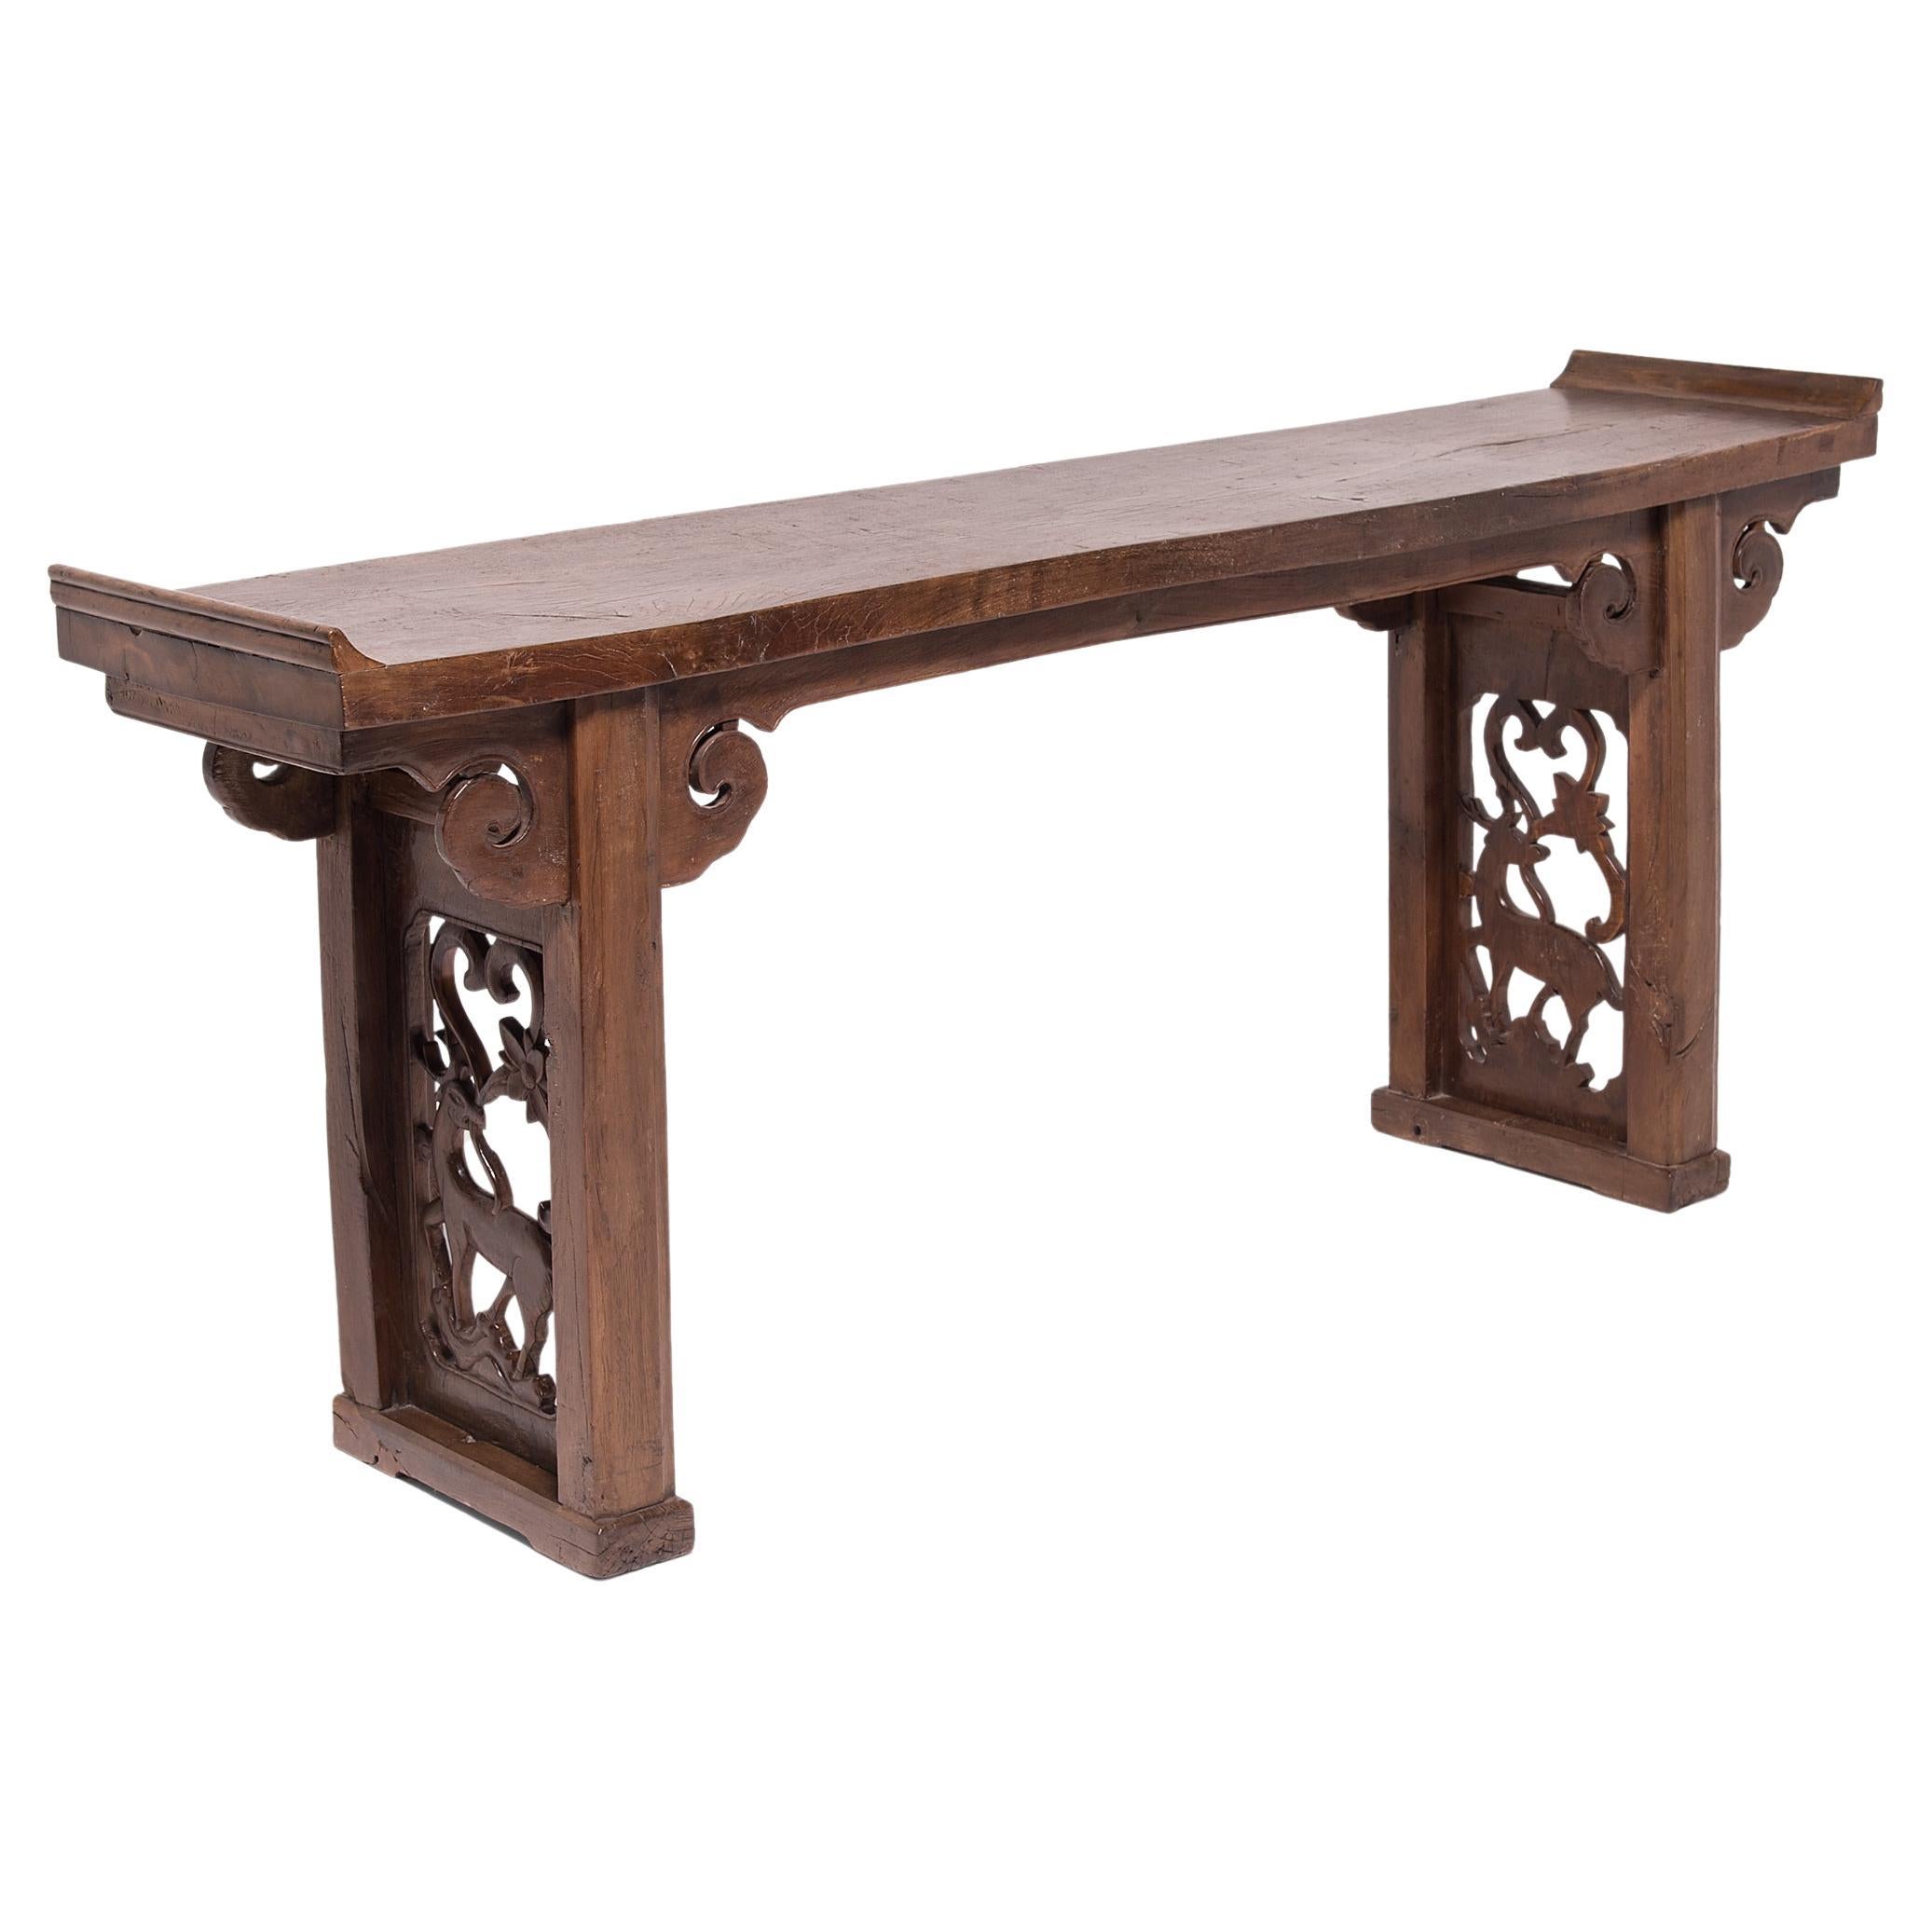 Chinese Plank Top Longevity Altar with Everted Ends, c. 1850 For Sale